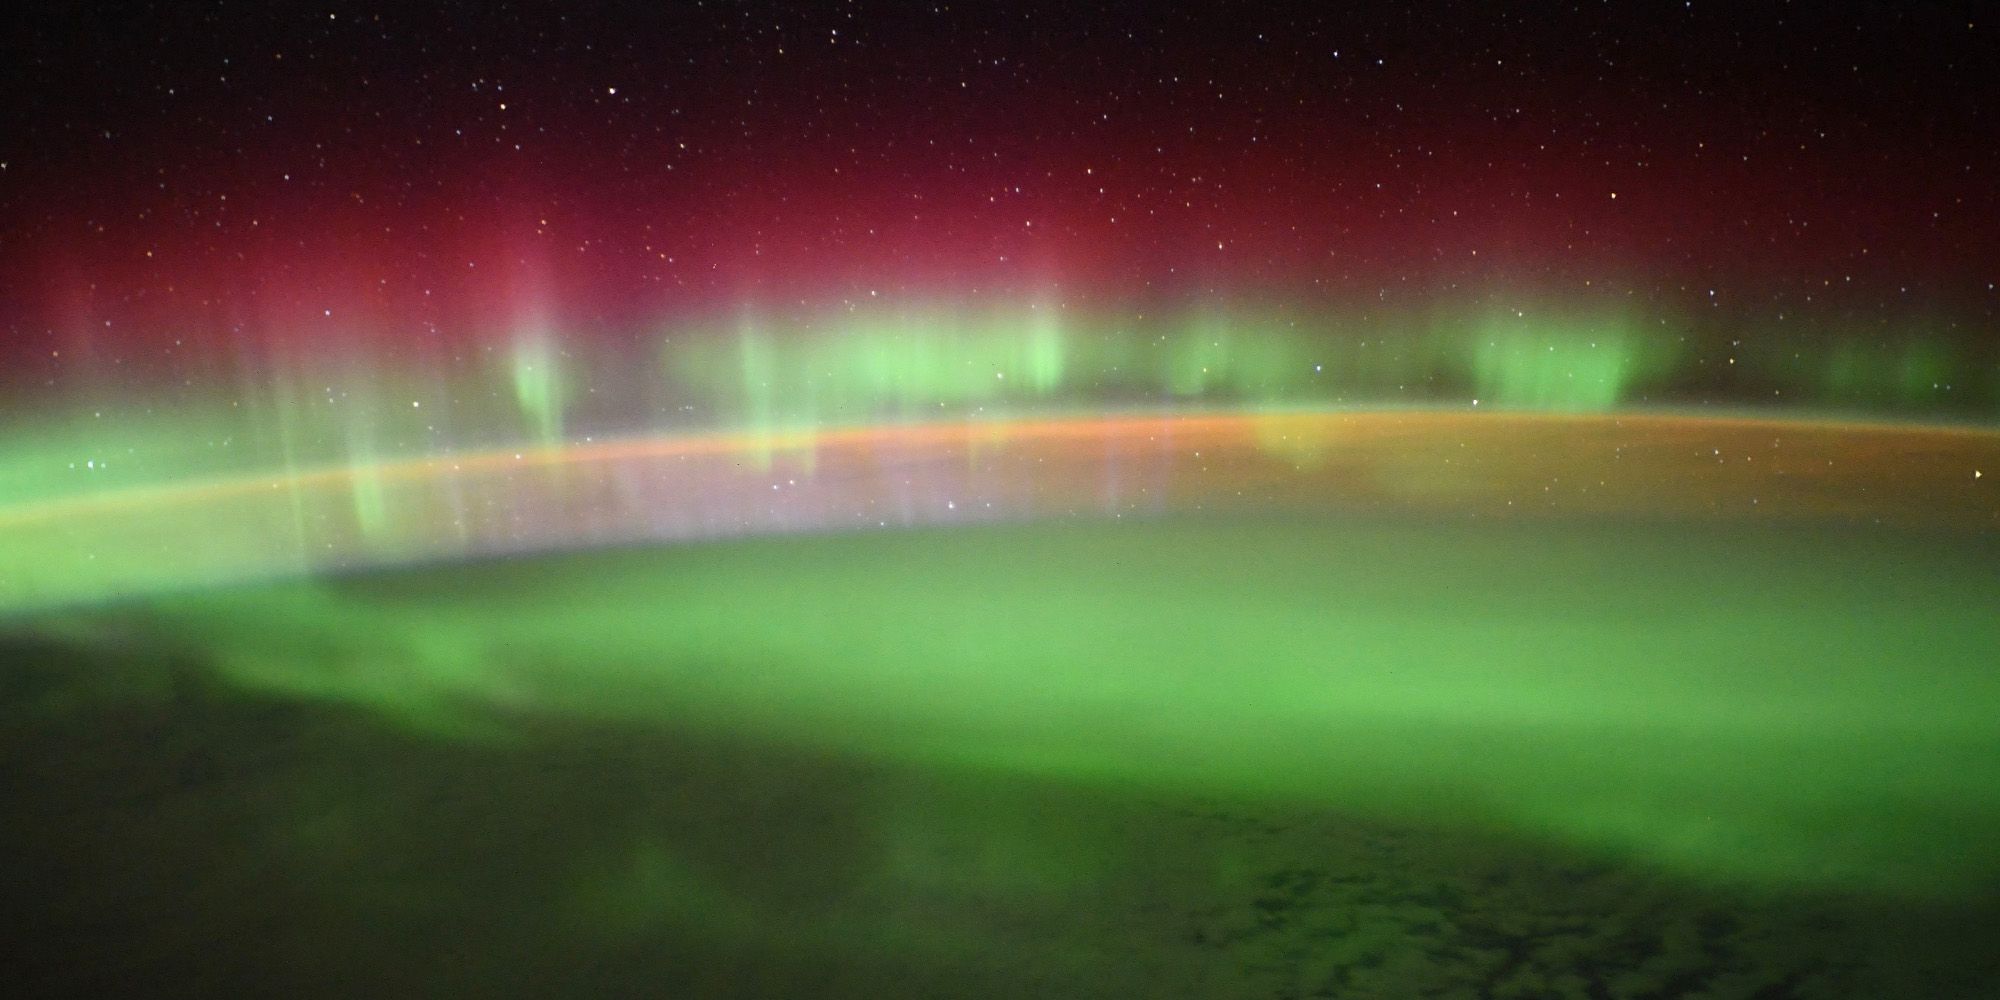 Astronaut Captures Jaw-Dropping Video Of Southern Lights From The ISS